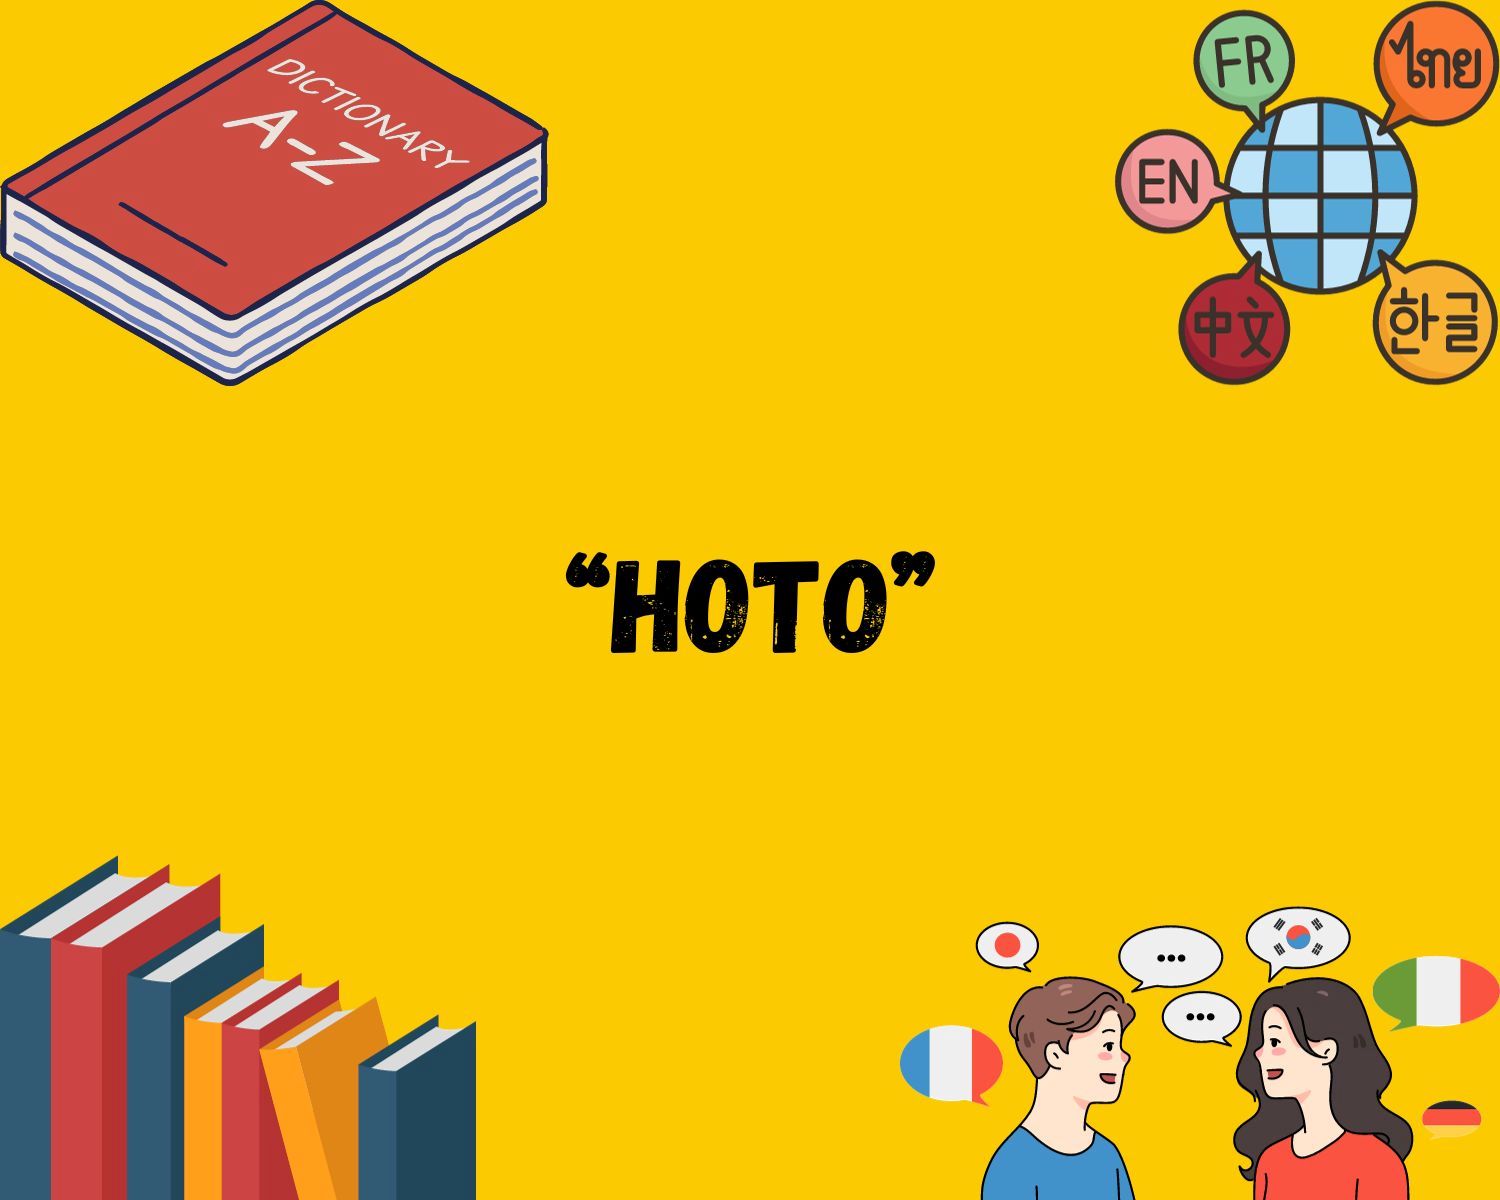 The Surprising Meaning Of “Hoto” In Spanish